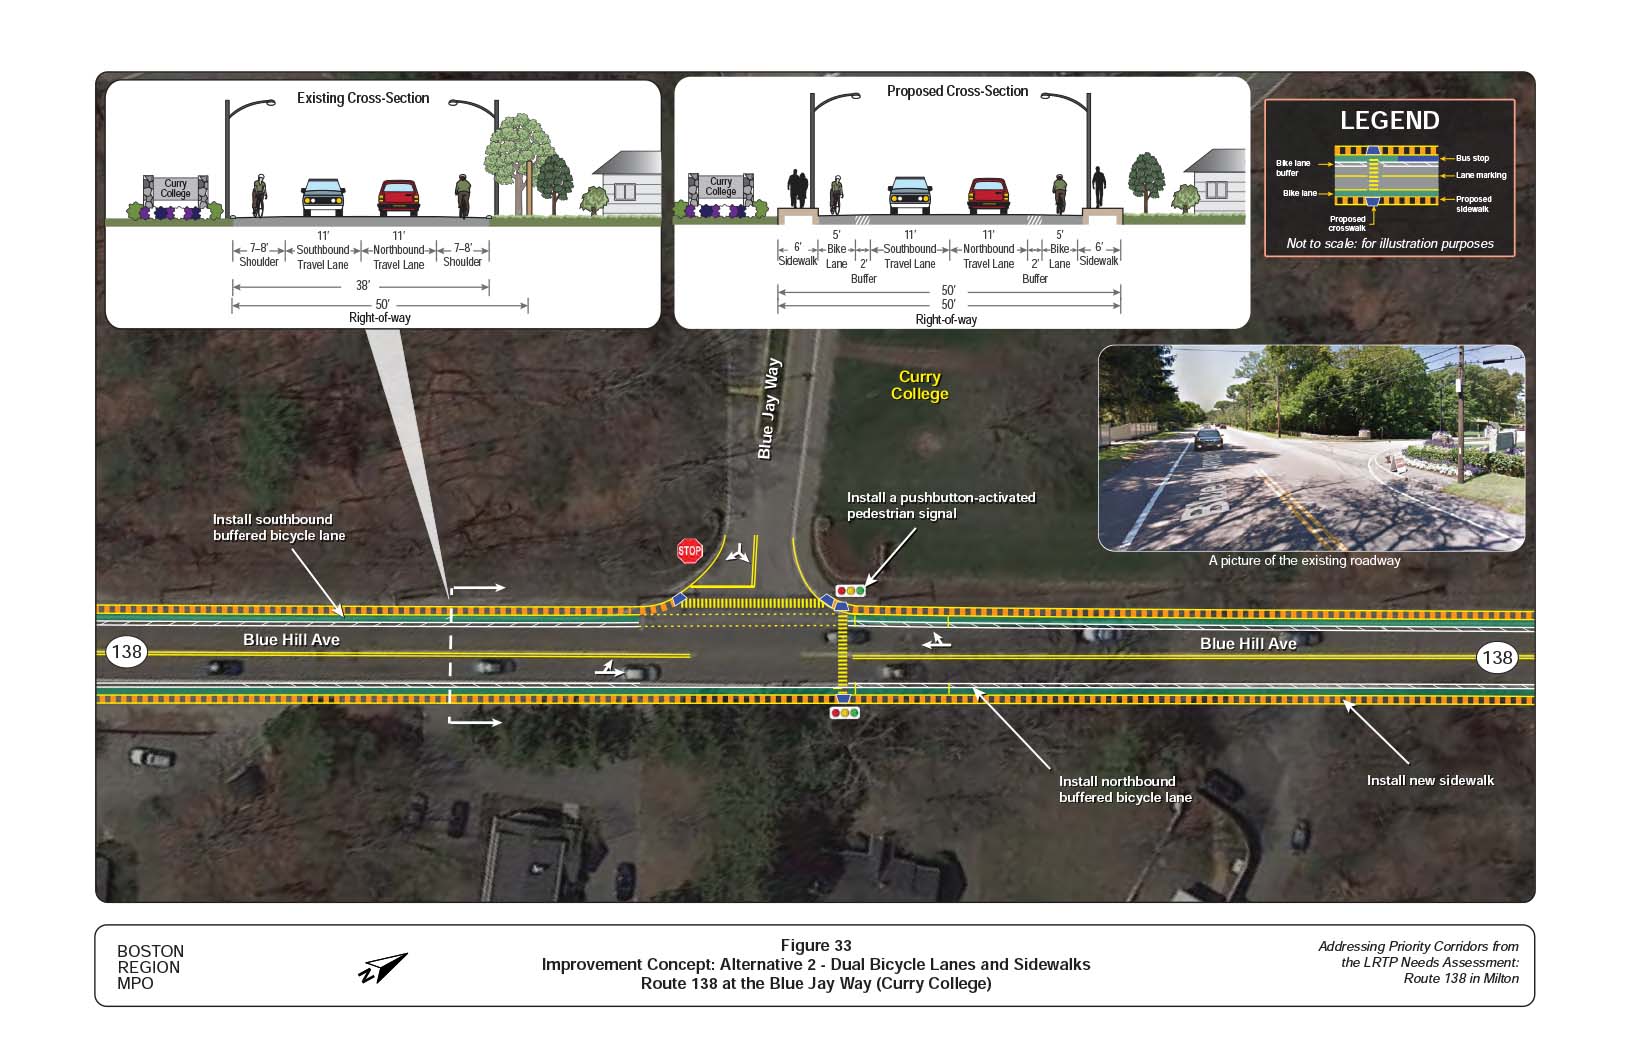 Figure 33 is an aerial photo of Route 138 at Blue Jay Way showing Alternative 2, dual bicycle lanes and sidewalks, and overlays showing the existing and proposed cross-sections.